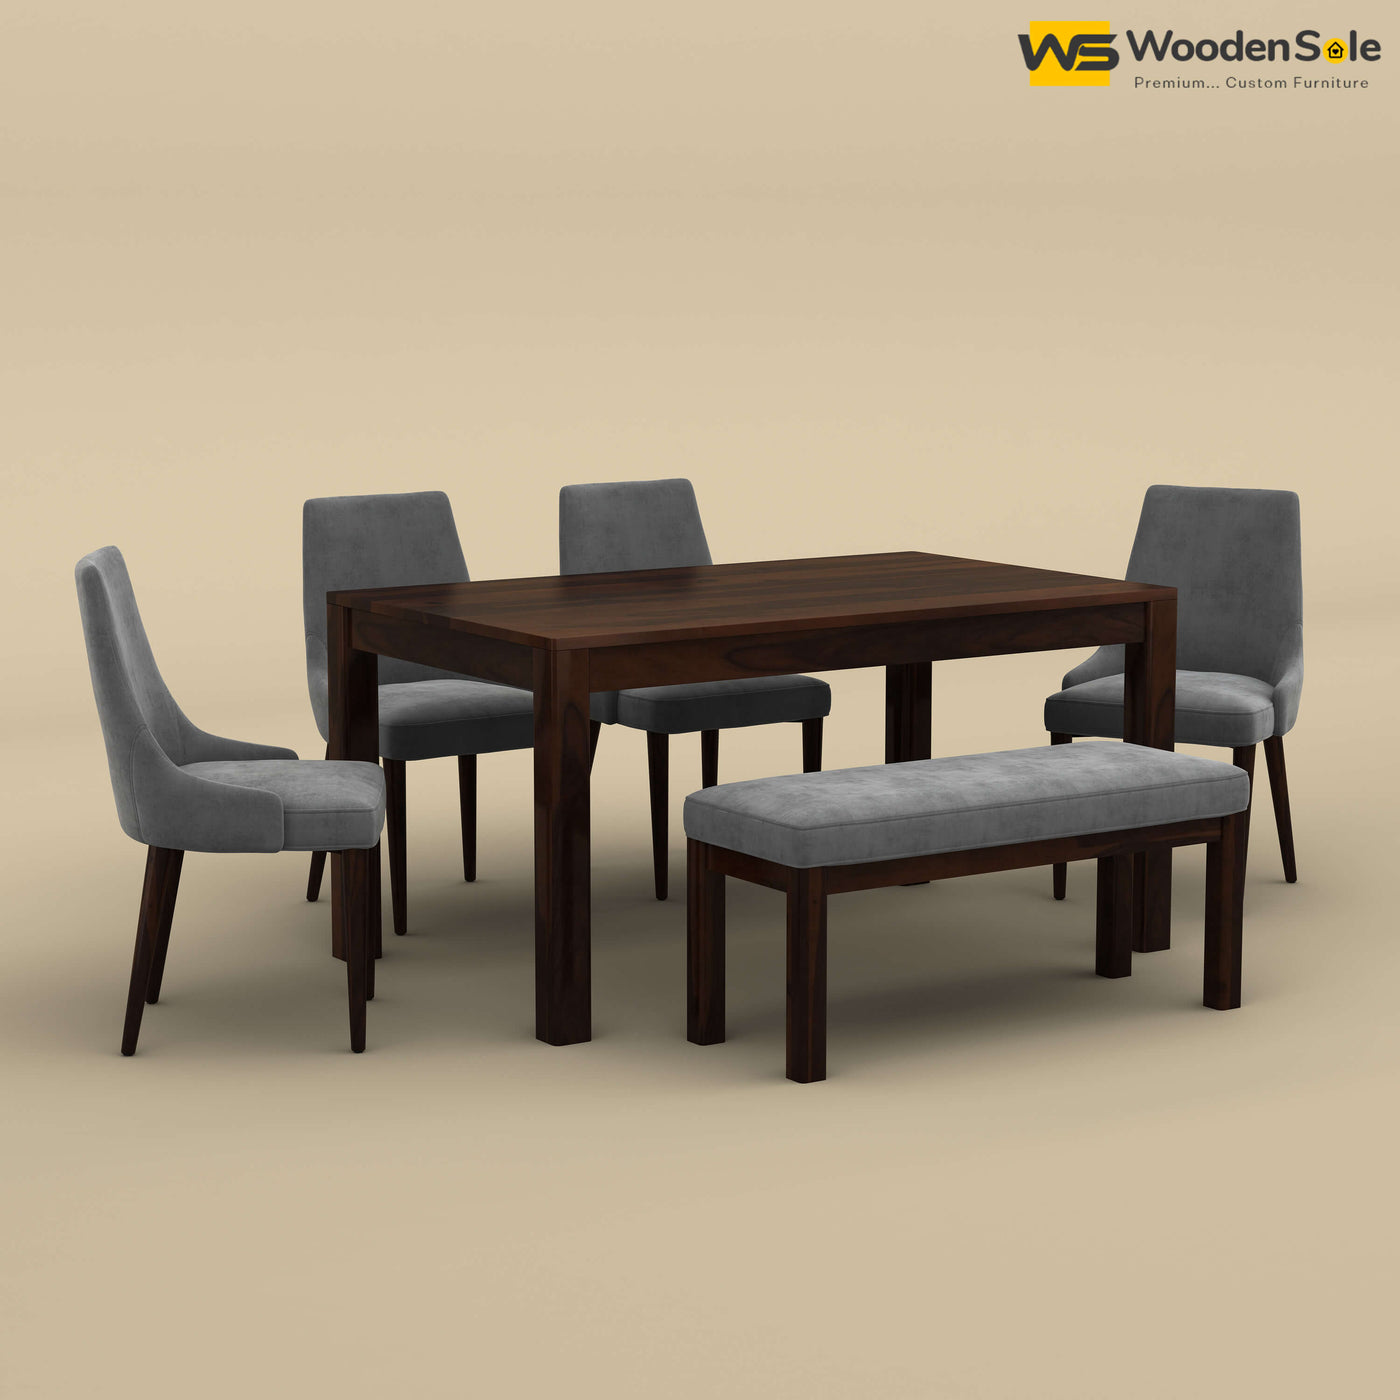 Ashley 6 Seater Dining Table Set with Bench (Walnut Finish)